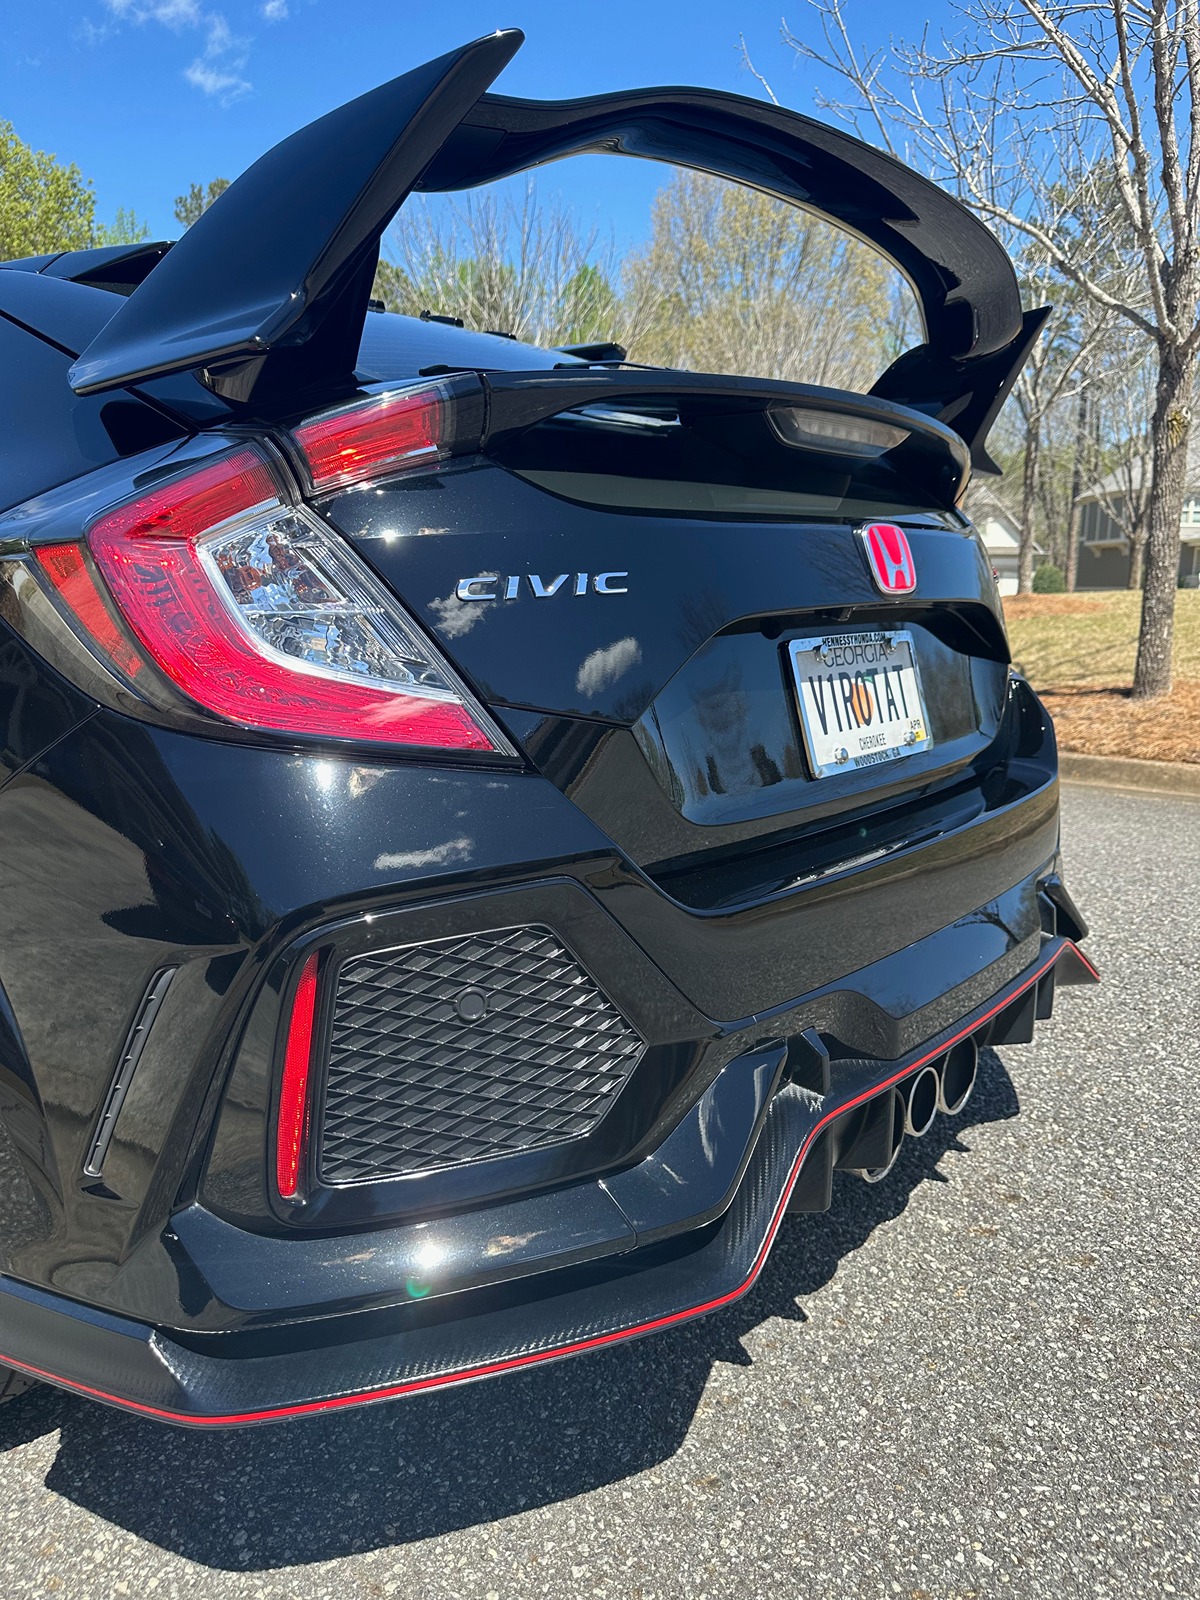 Honda Civic 10th gen Sold. 2019 Civic Type R for sale IMG_8141